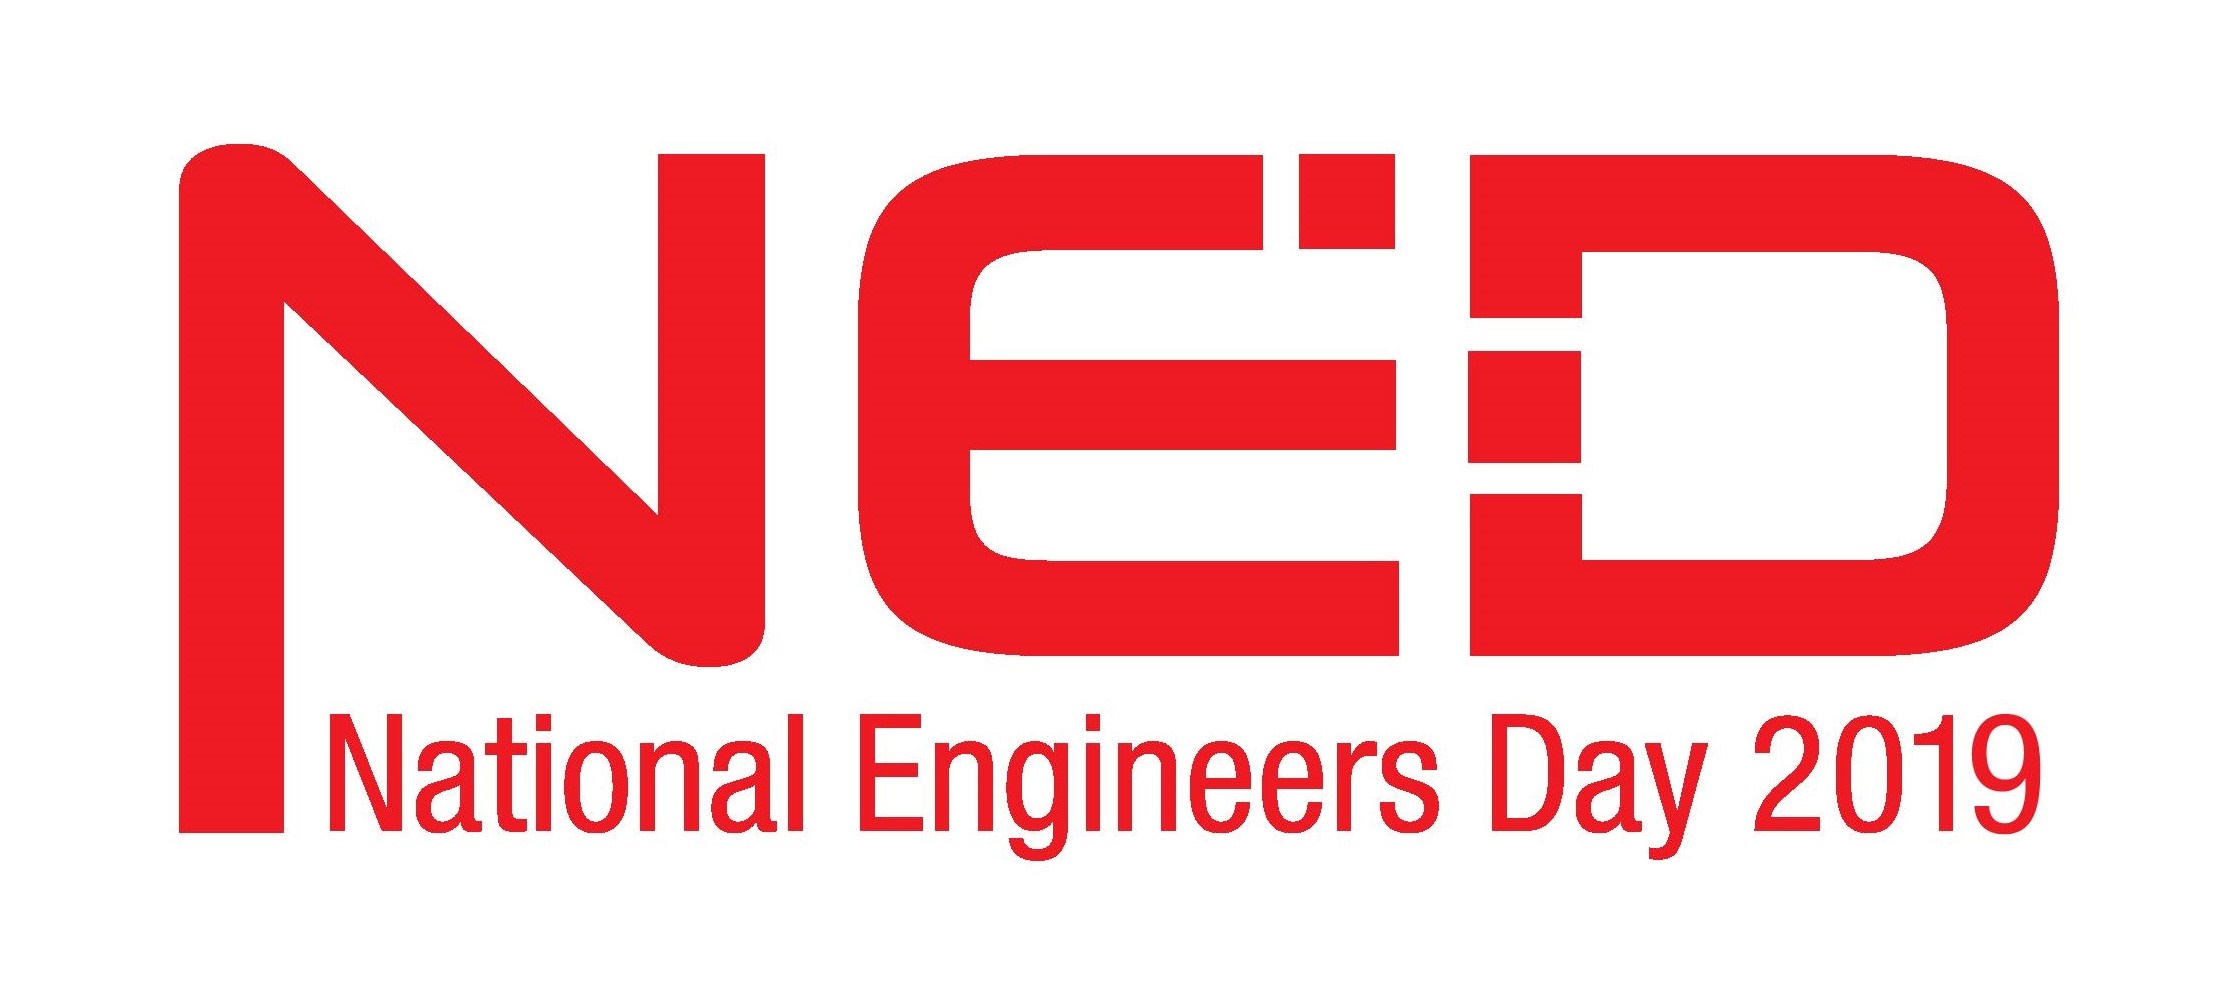 National Engineers Day (NED) 2019, Singapore, North West, Singapore